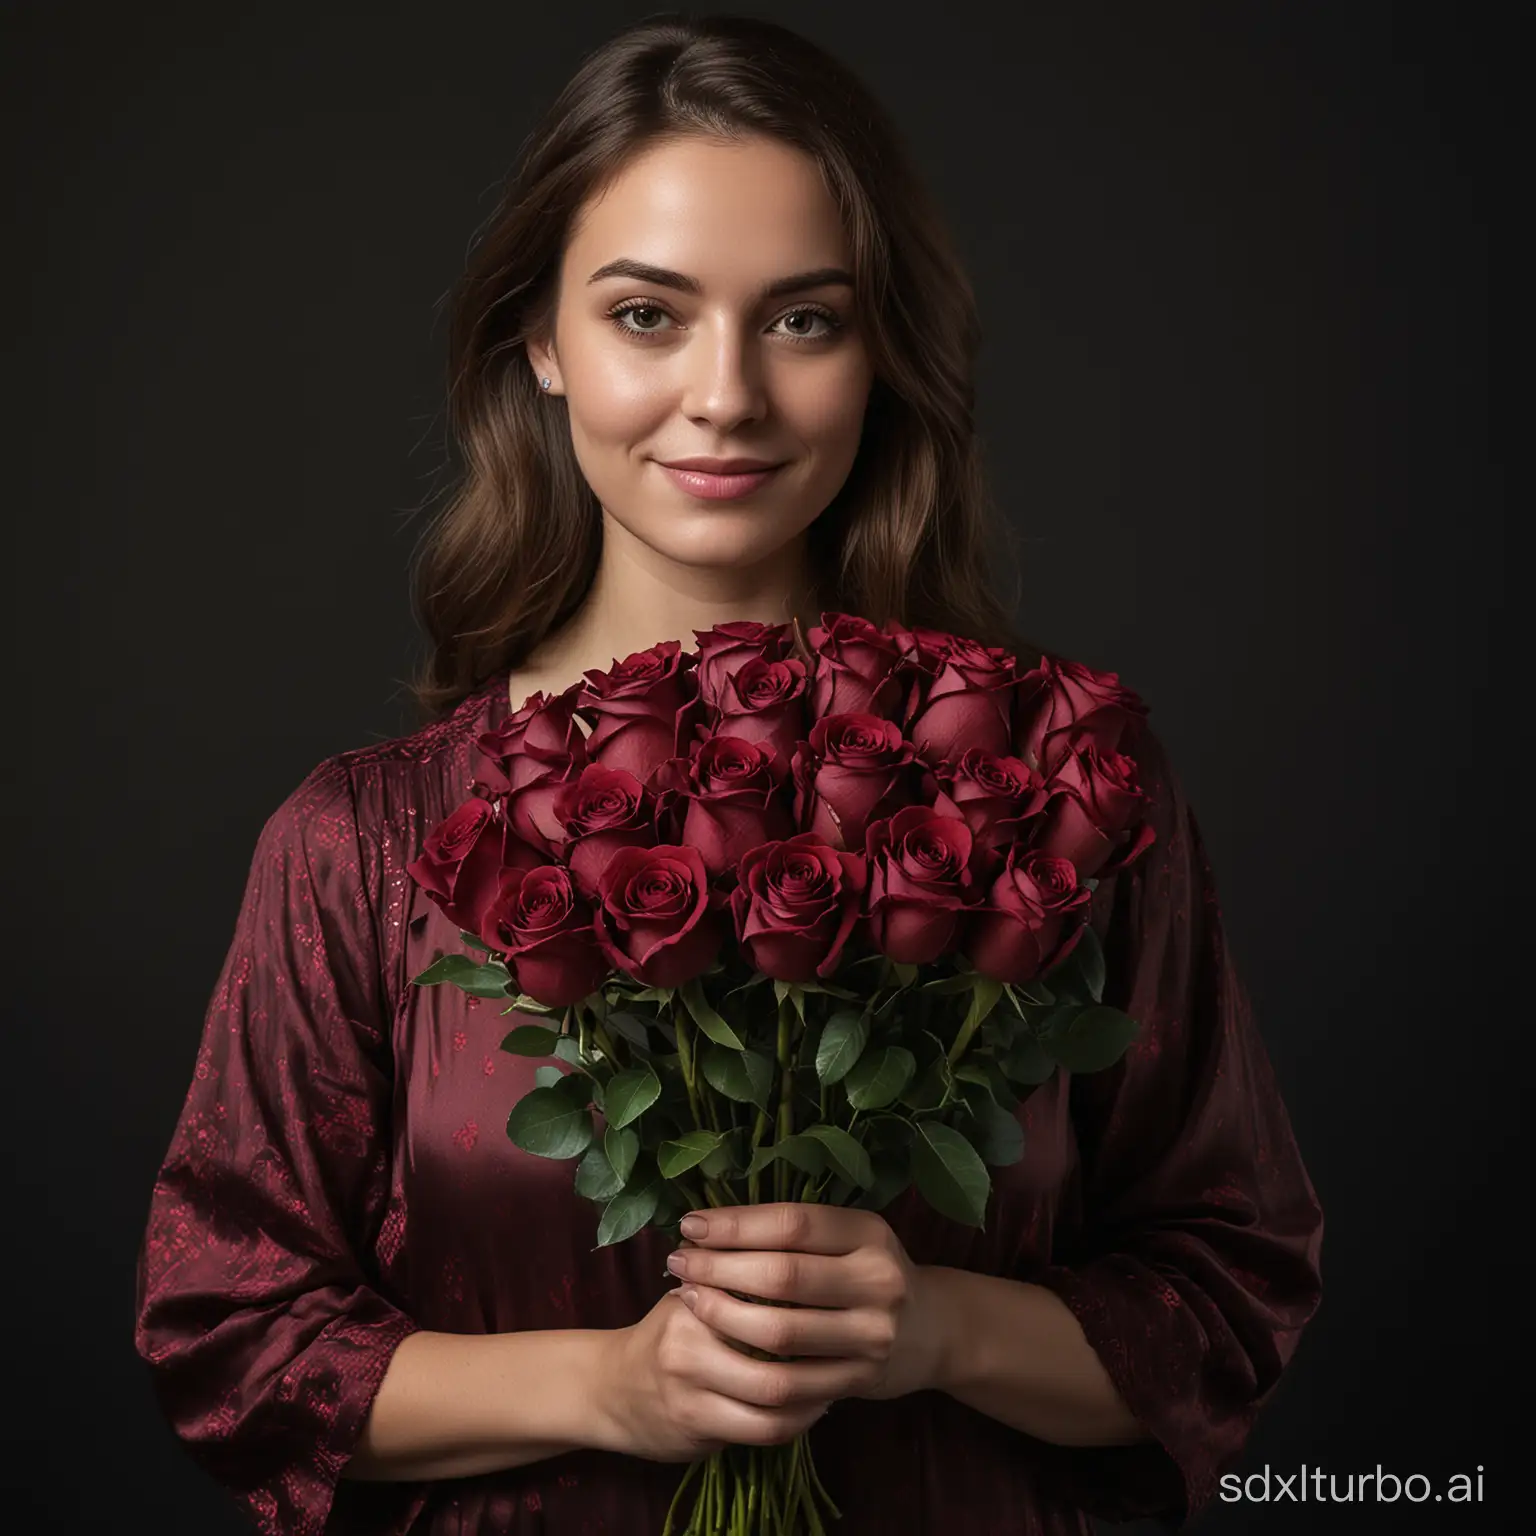 A woman holds 101 burgundy roses of the madame red variety in her hands. behind the girl is a monochrome black background. The girl is in semi-darkness behind. But the bright evenly diffused light falls evenly on the girl herself and on the bouquet of roses. the woman is about 35 years old